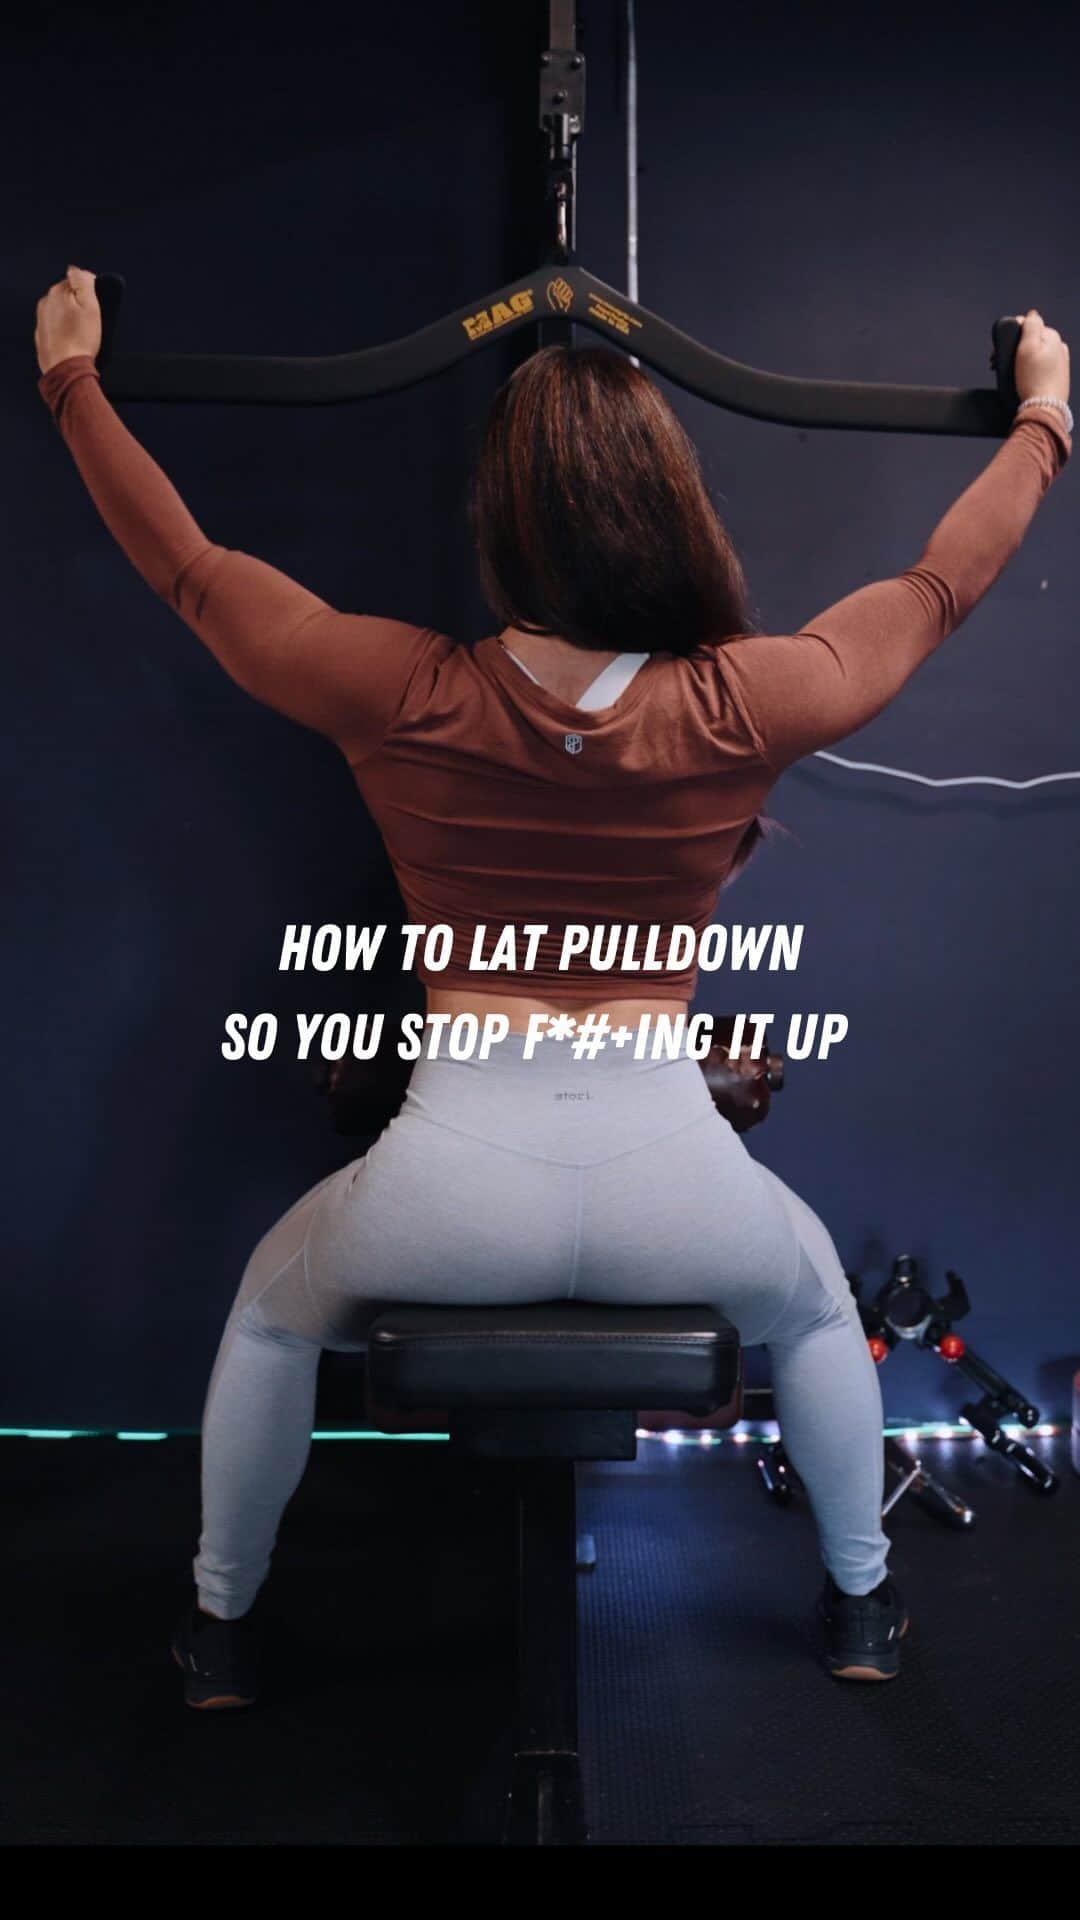 Camille Leblanc-Bazinetのインスタグラム：「Mastering the Lat Pulldown: Your Path to a Stronger, Muscular Back 💪  Understanding the role of your lats is the key to sculpting a powerful and well-defined back. These muscles are designed to pull the shoulders back and down, and knowing this fundamental action can be a game-changer in your journey to building a robust back.  One common mistake I often observe in back training is folks relying heavily on their biceps to pull the weight, neglecting the intended action of engaging the lats. To truly target and develop your lats, it’s crucial to shift your focus to pulling those shoulders back and down with purpose.  Another significant oversight is limiting your range of motion. When it comes to muscle growth, the stretch and load phase of a movement is where the magic happens. Embrace a full range of motion deliberately and with purpose, as it’s the most potent way to stimulate muscle growth effectively.  Now, put this knowledge into action with this Lat Pulldown workout:  🏋️‍♂️ Set 1: 20 repetitions with a controlled 2-second up and 2-second down tempo.  🏋️‍♂️ Set 2: 15 repetitions with a double contraction at the top (raise the load halfway down, bring it back up, lower it fully, and lift it up = 1 repetition).  🏋️‍♂️ Set 3: 12 heavy repetitions with a 1-second pause in full contraction and a slow 3-second ascent.  🏋️‍♂️ Set 4: 10 heavy repetitions with a deliberate 2-second ascent.  🏋️‍♂️ Set 5: Start with 10 heavy repetitions, then drop the load by 30%, and push for maximum repetitions. Drop the load another 30%, and give it your all for another max set.  Remember to rest for 2 minutes between sets, allowing your muscles to recover and perform optimally.  In the realm of muscle building, time under tension is the king, and volume is the queen. Embrace both, stay focused, and watch your back gains soar to new heights. 💥💥  Ready to conquer your workout? 💪 Let’s do this!  * full disclosure I use to do these wrong and I wish someone corrected me」